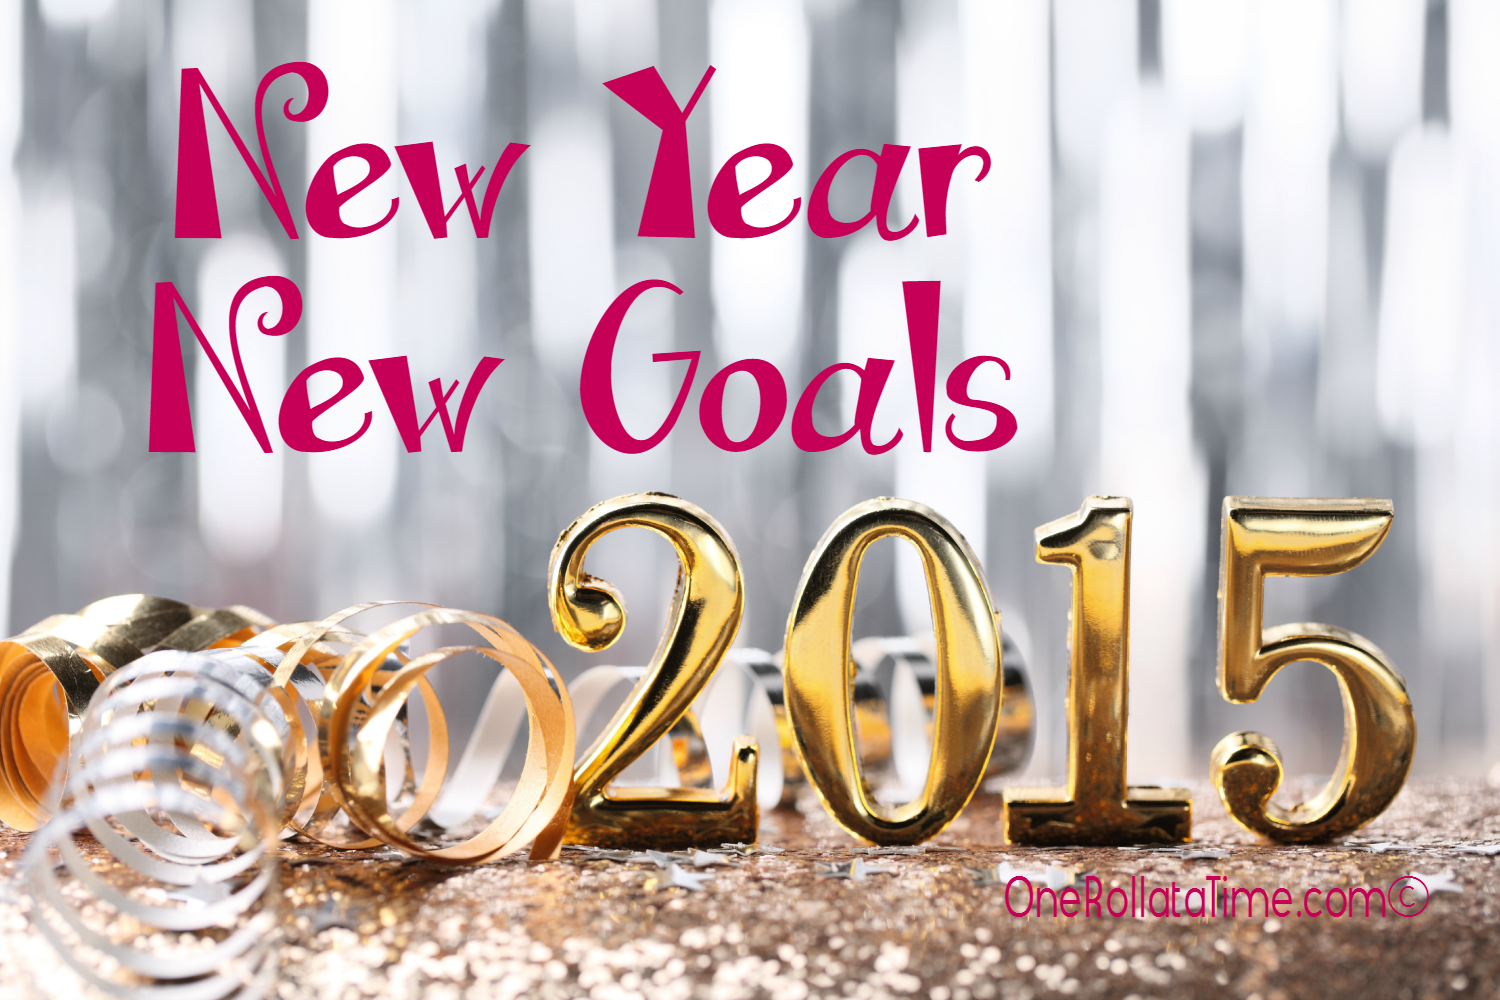 New Year – New Goals